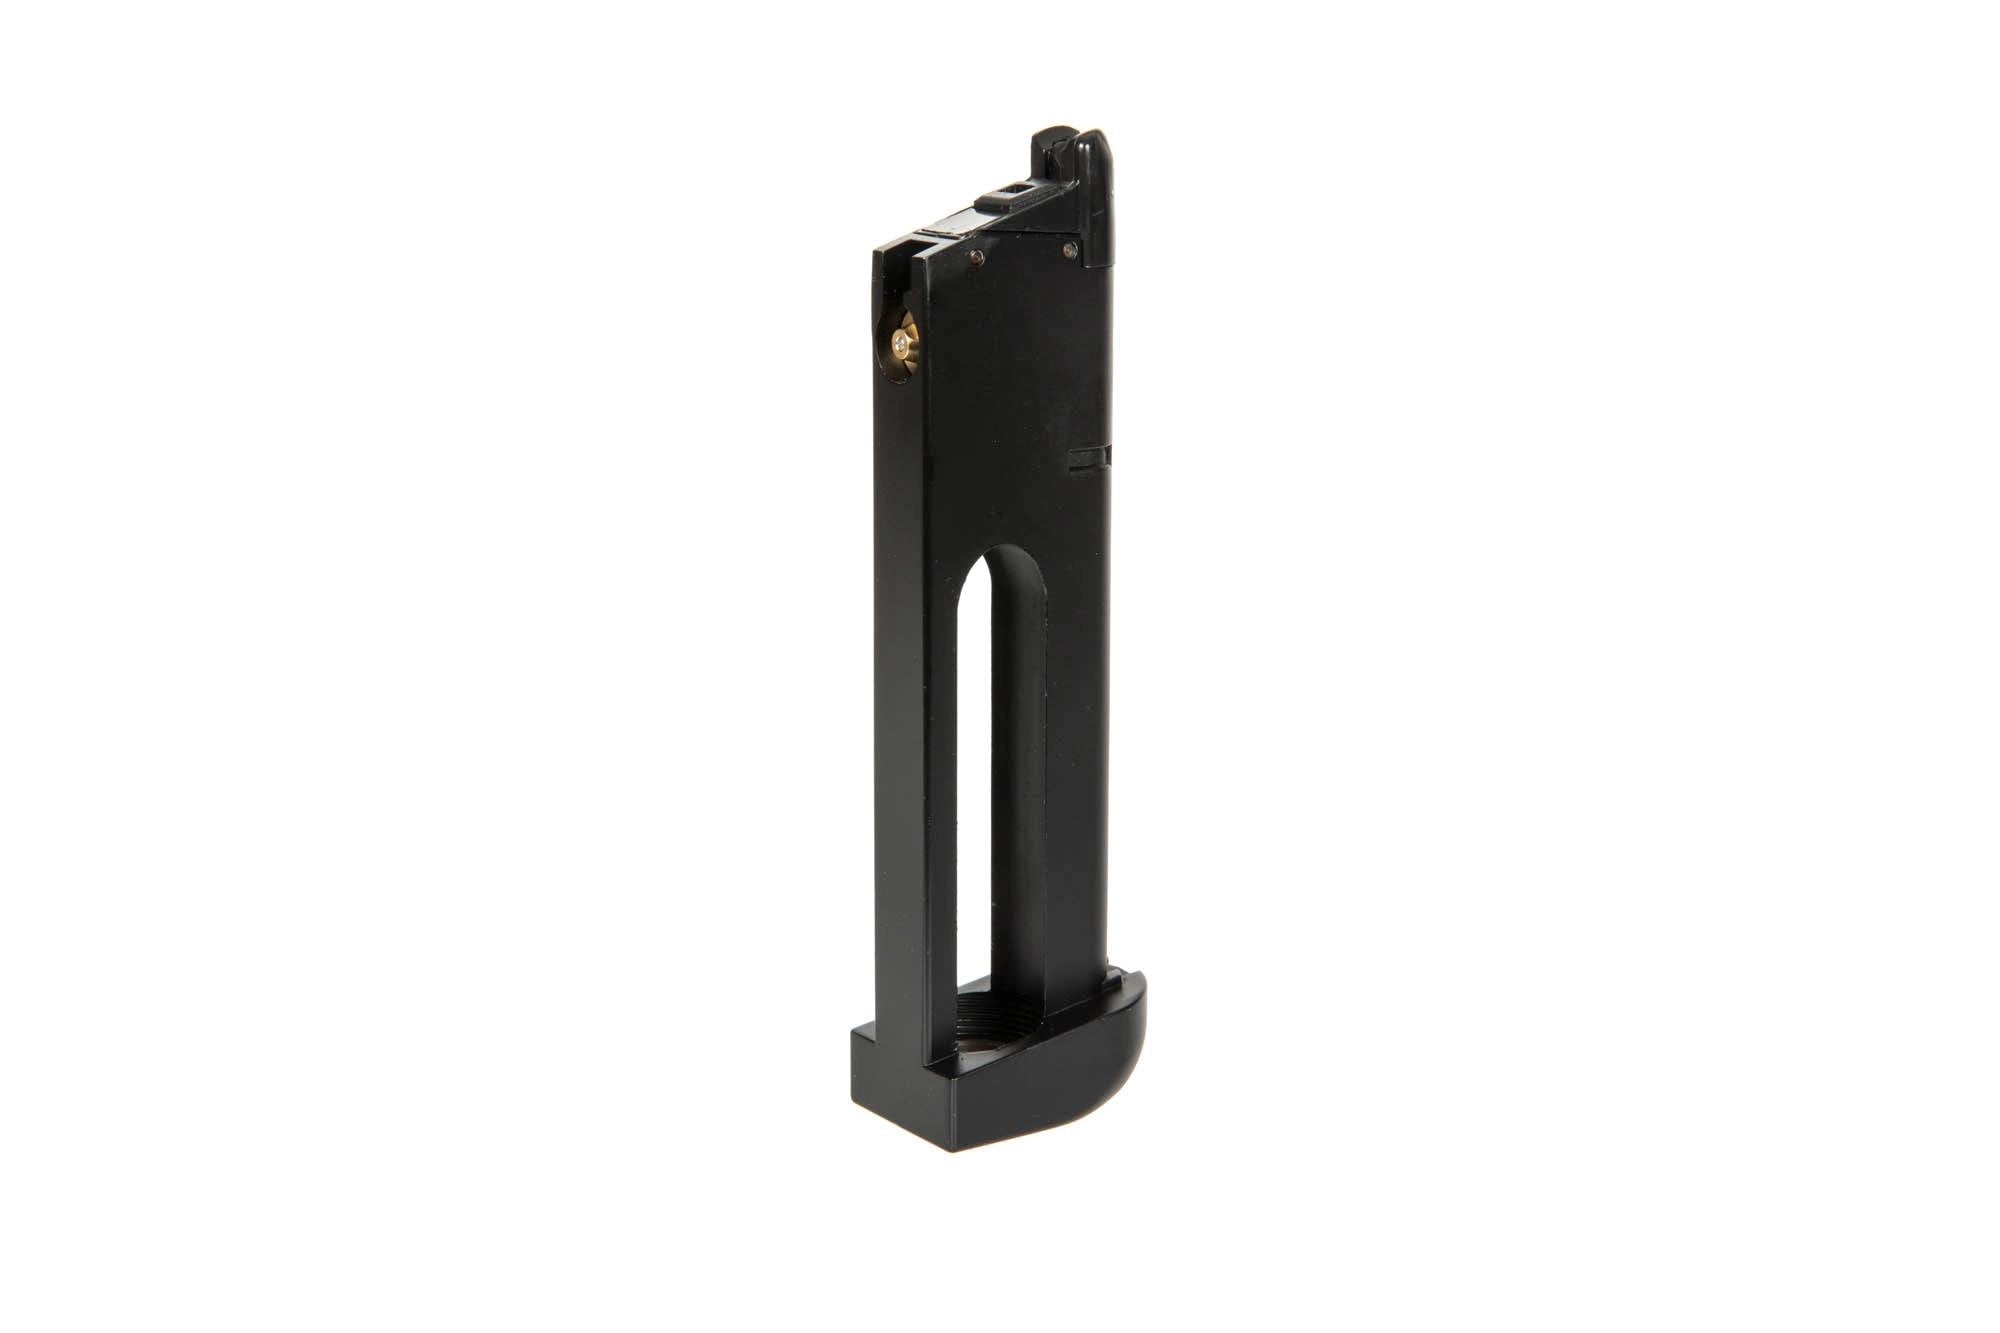 CO2 27 BB Magazine for Double Bell 823 (M1911) Replicas-1